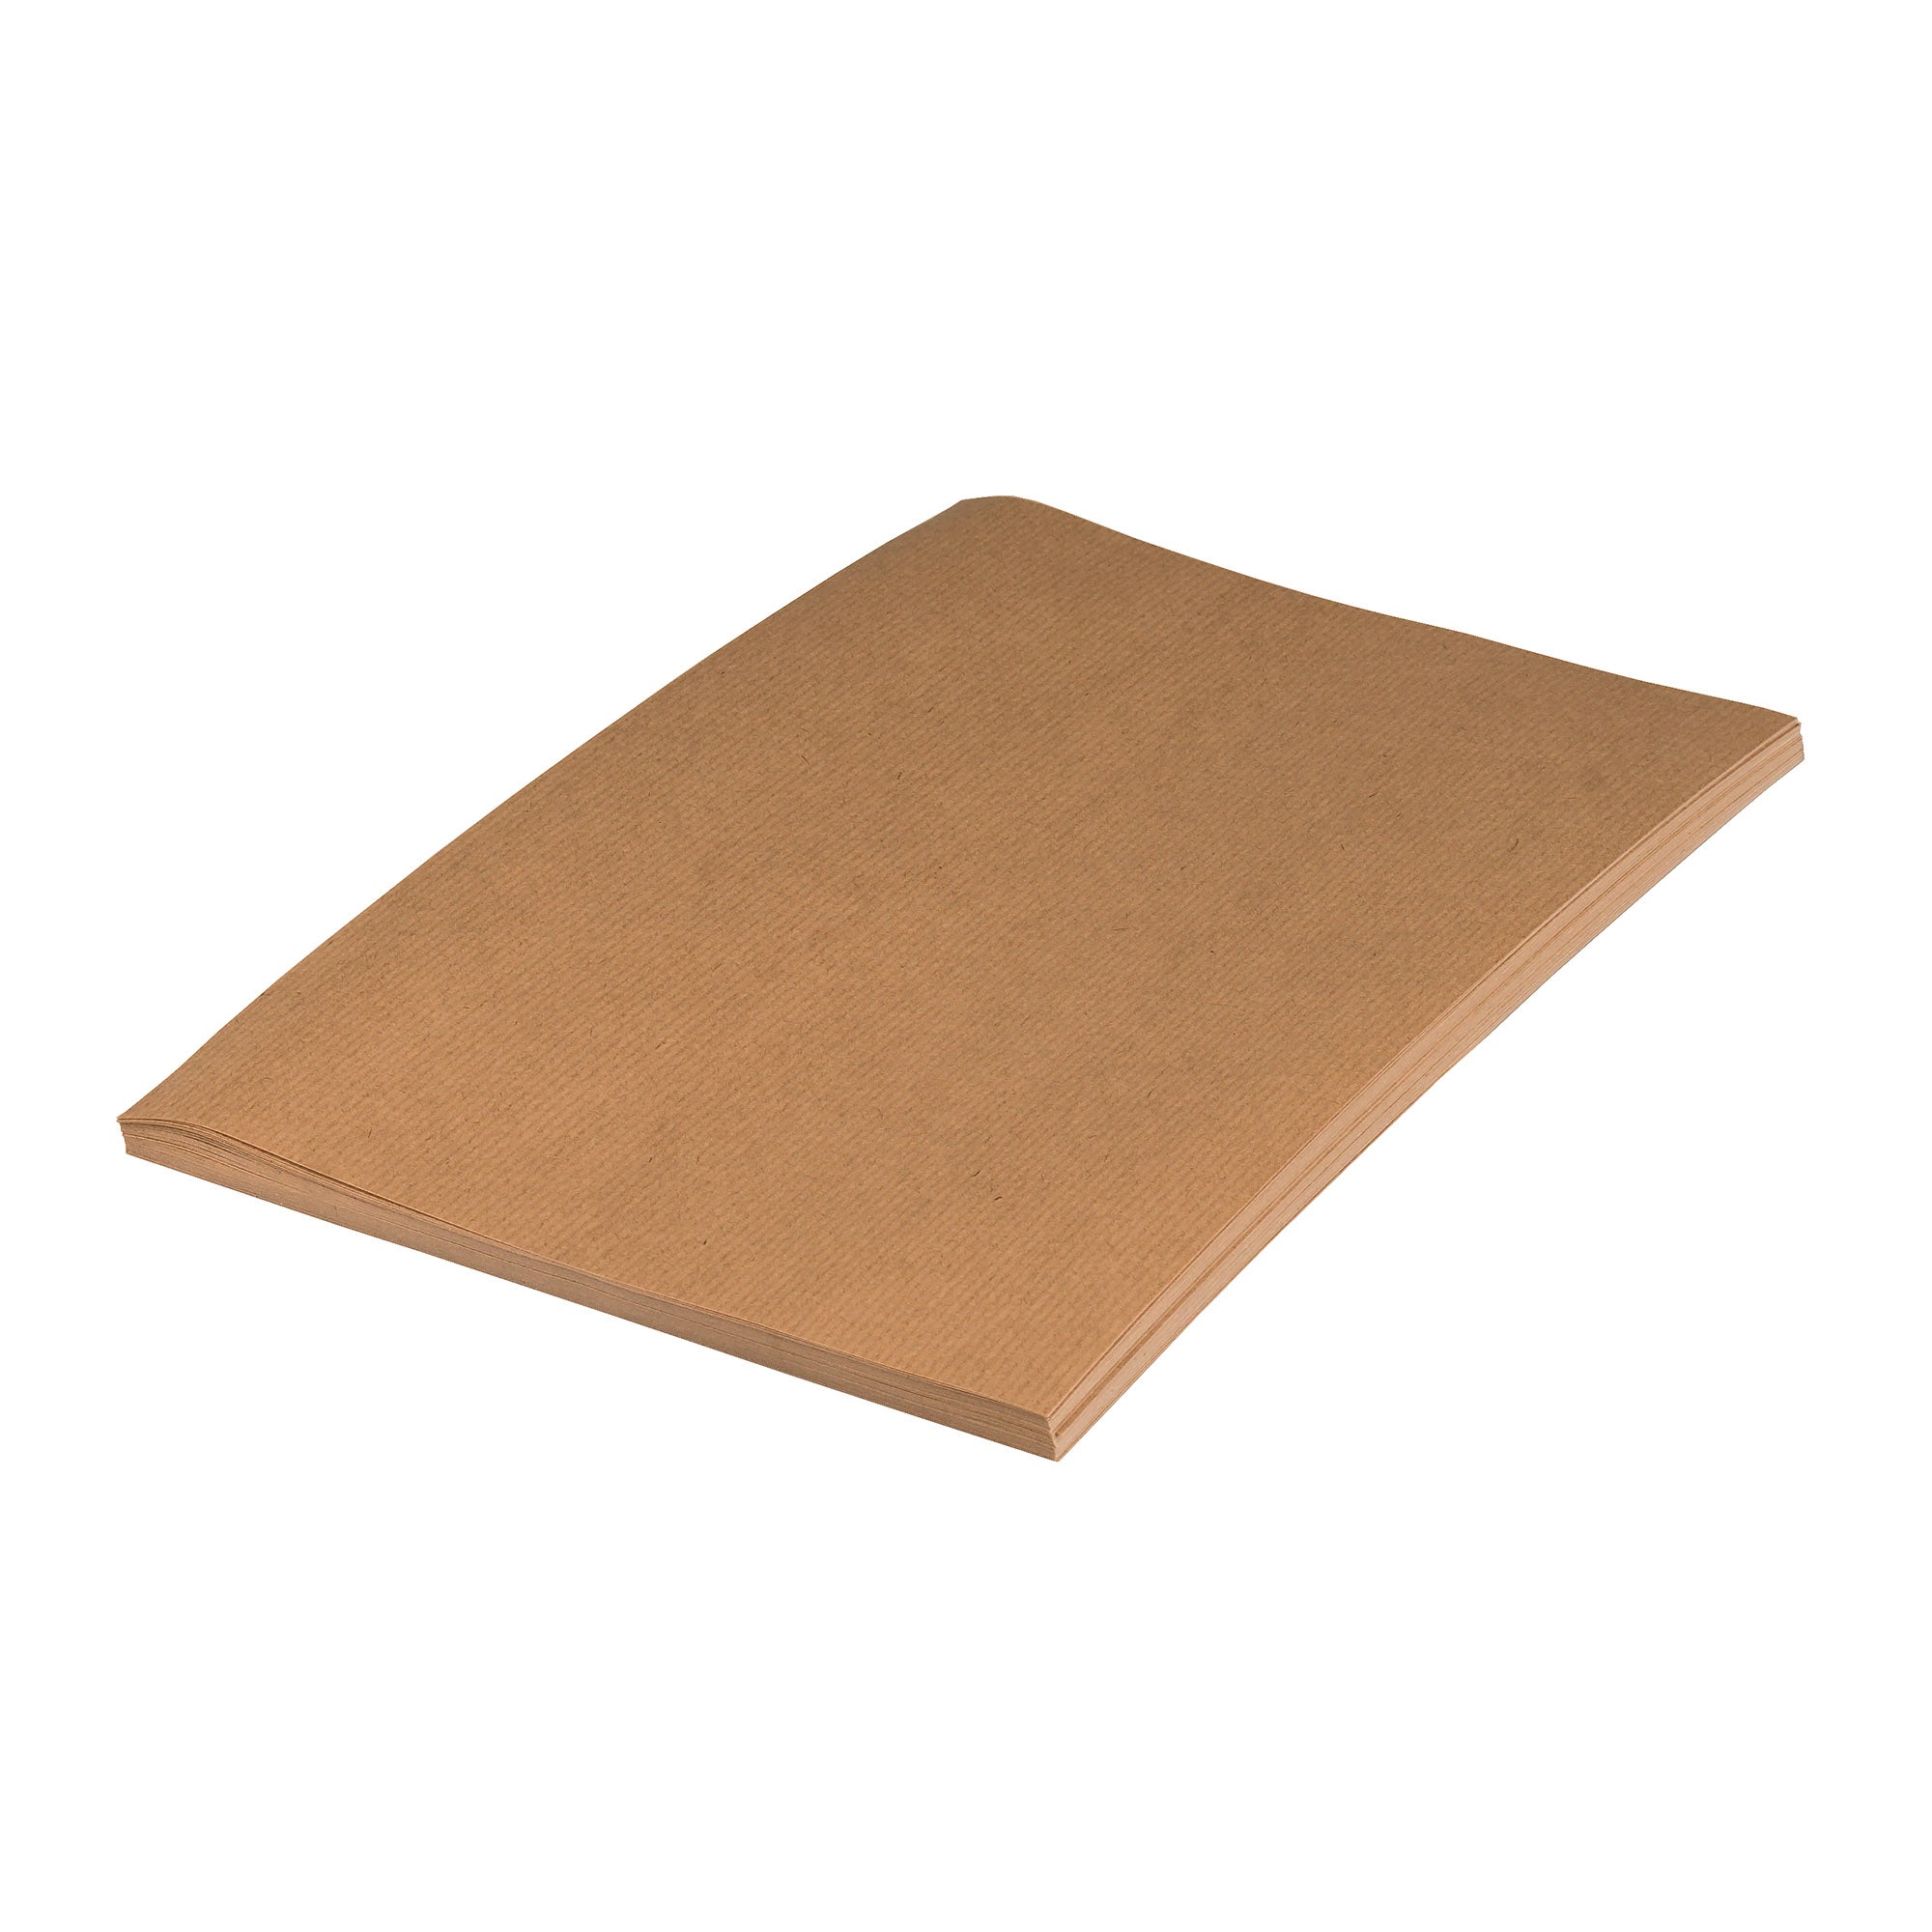 Self-adhesive kraft paper A4 210x297mm 50 sheets ribbed paper - MD Labels